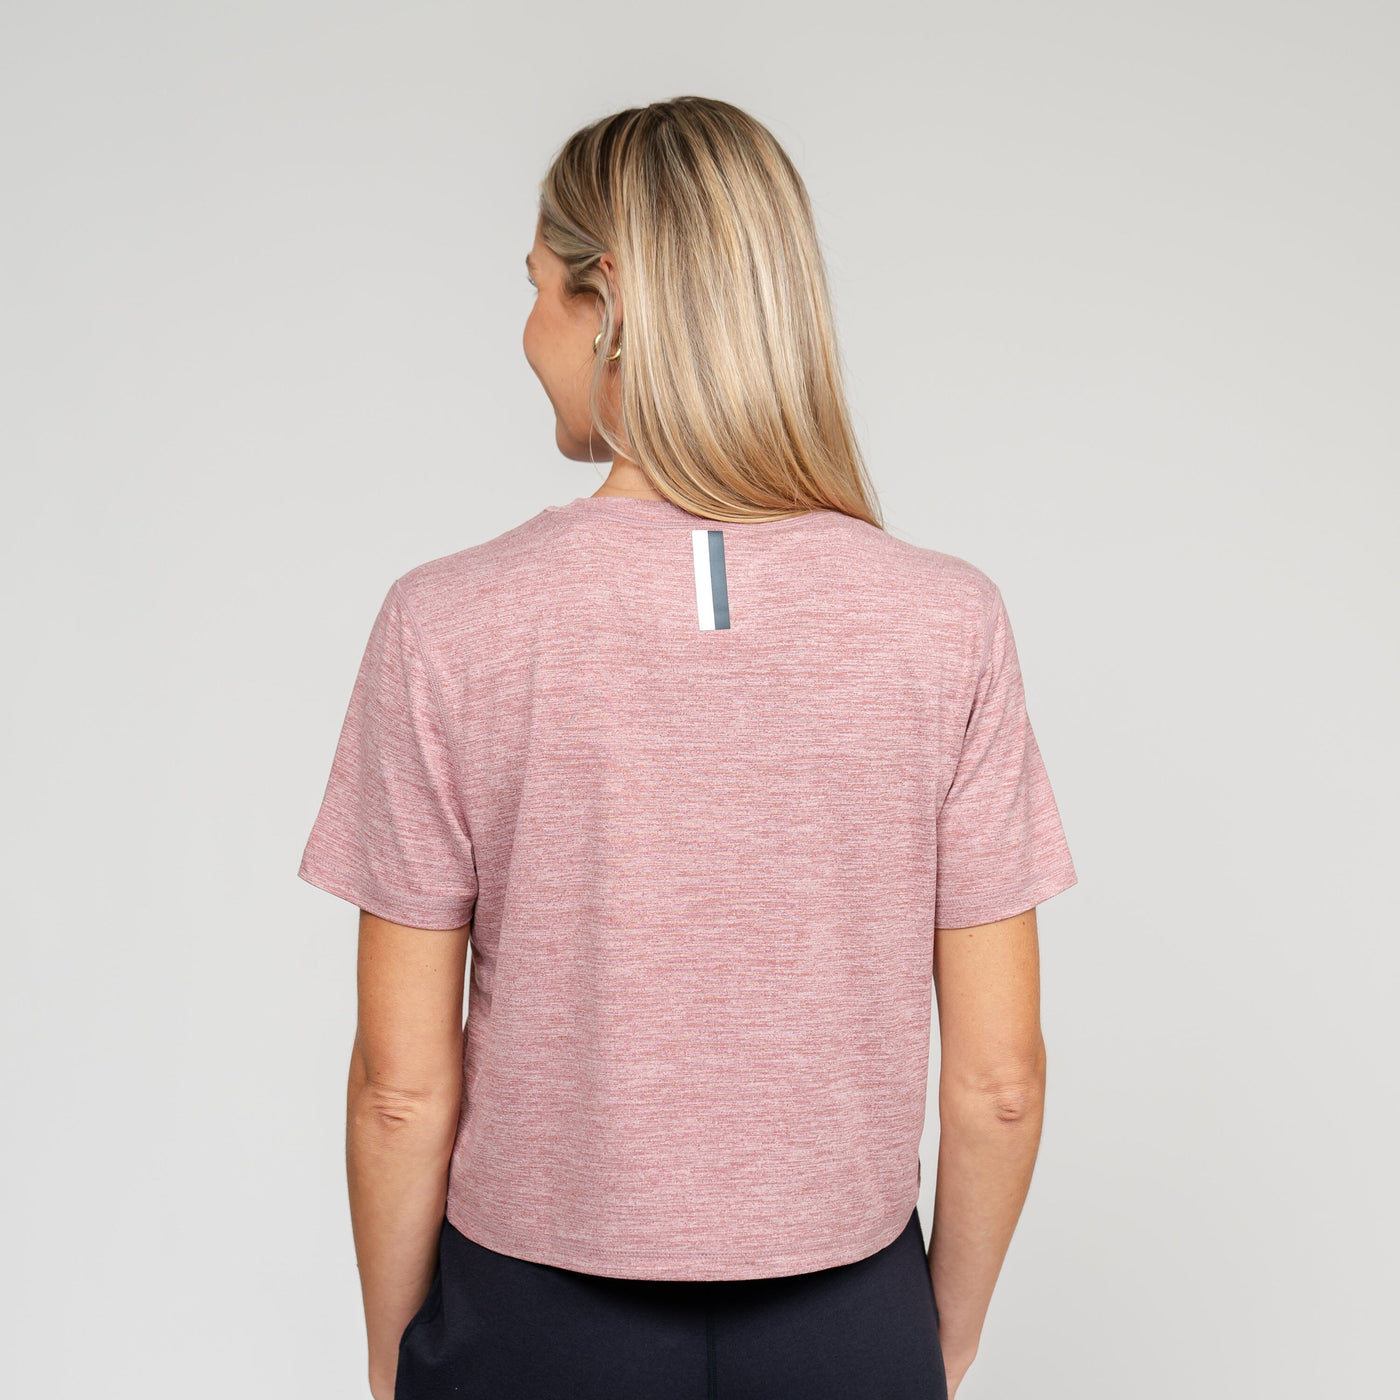 Drift Performance Crop Tee | Heather - Red Card Red/White